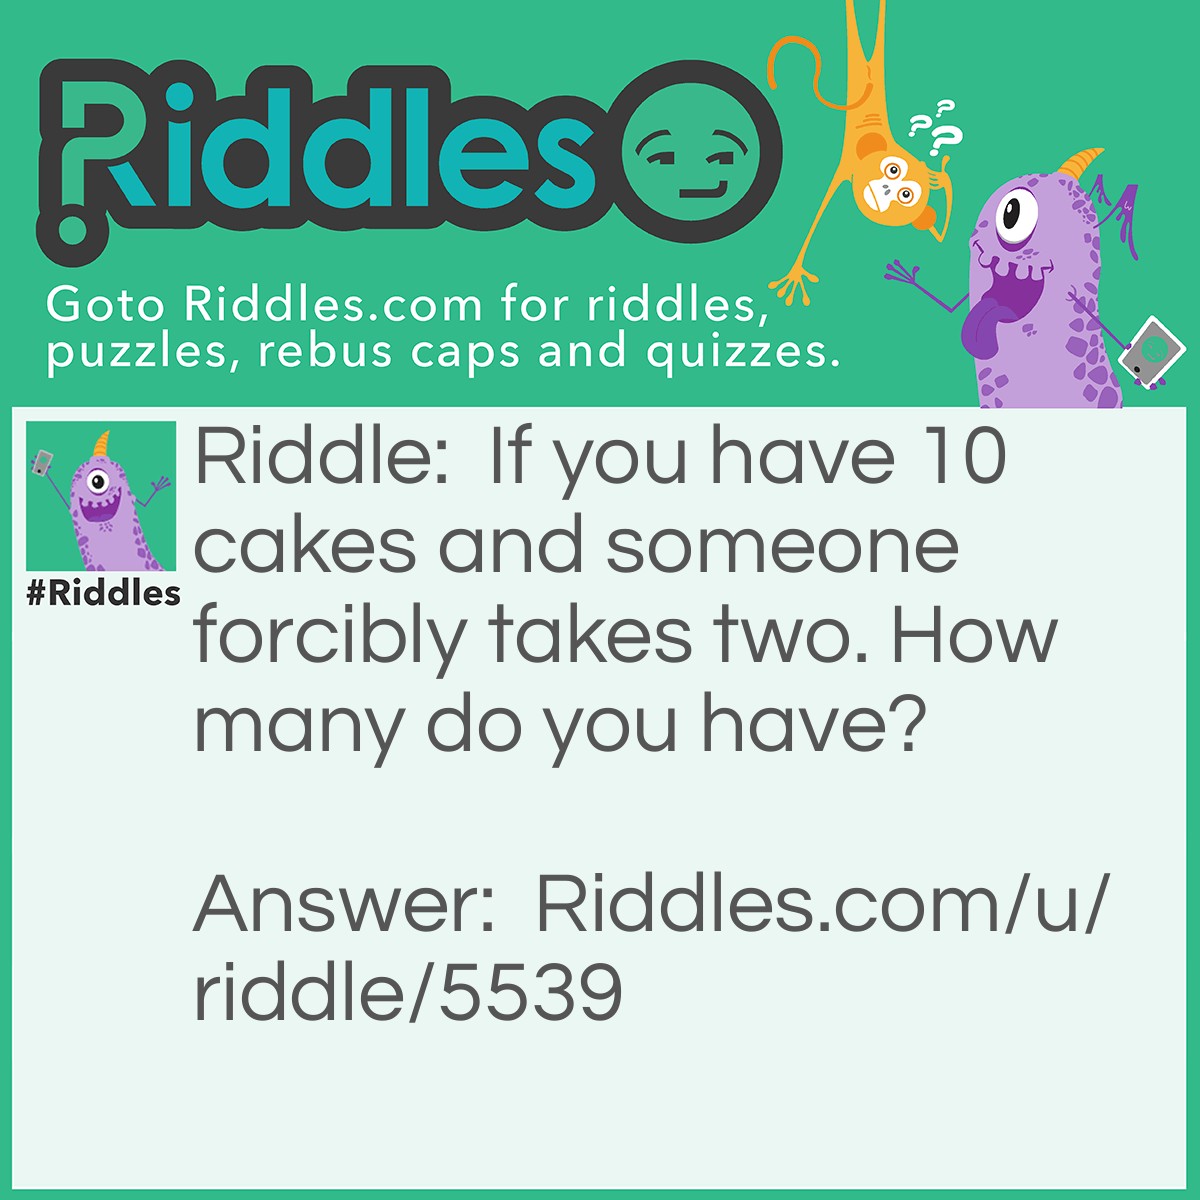 Riddle: If you have 10 cakes and someone forcibly takes two. How many do you have? Answer: 10 and a dead body.